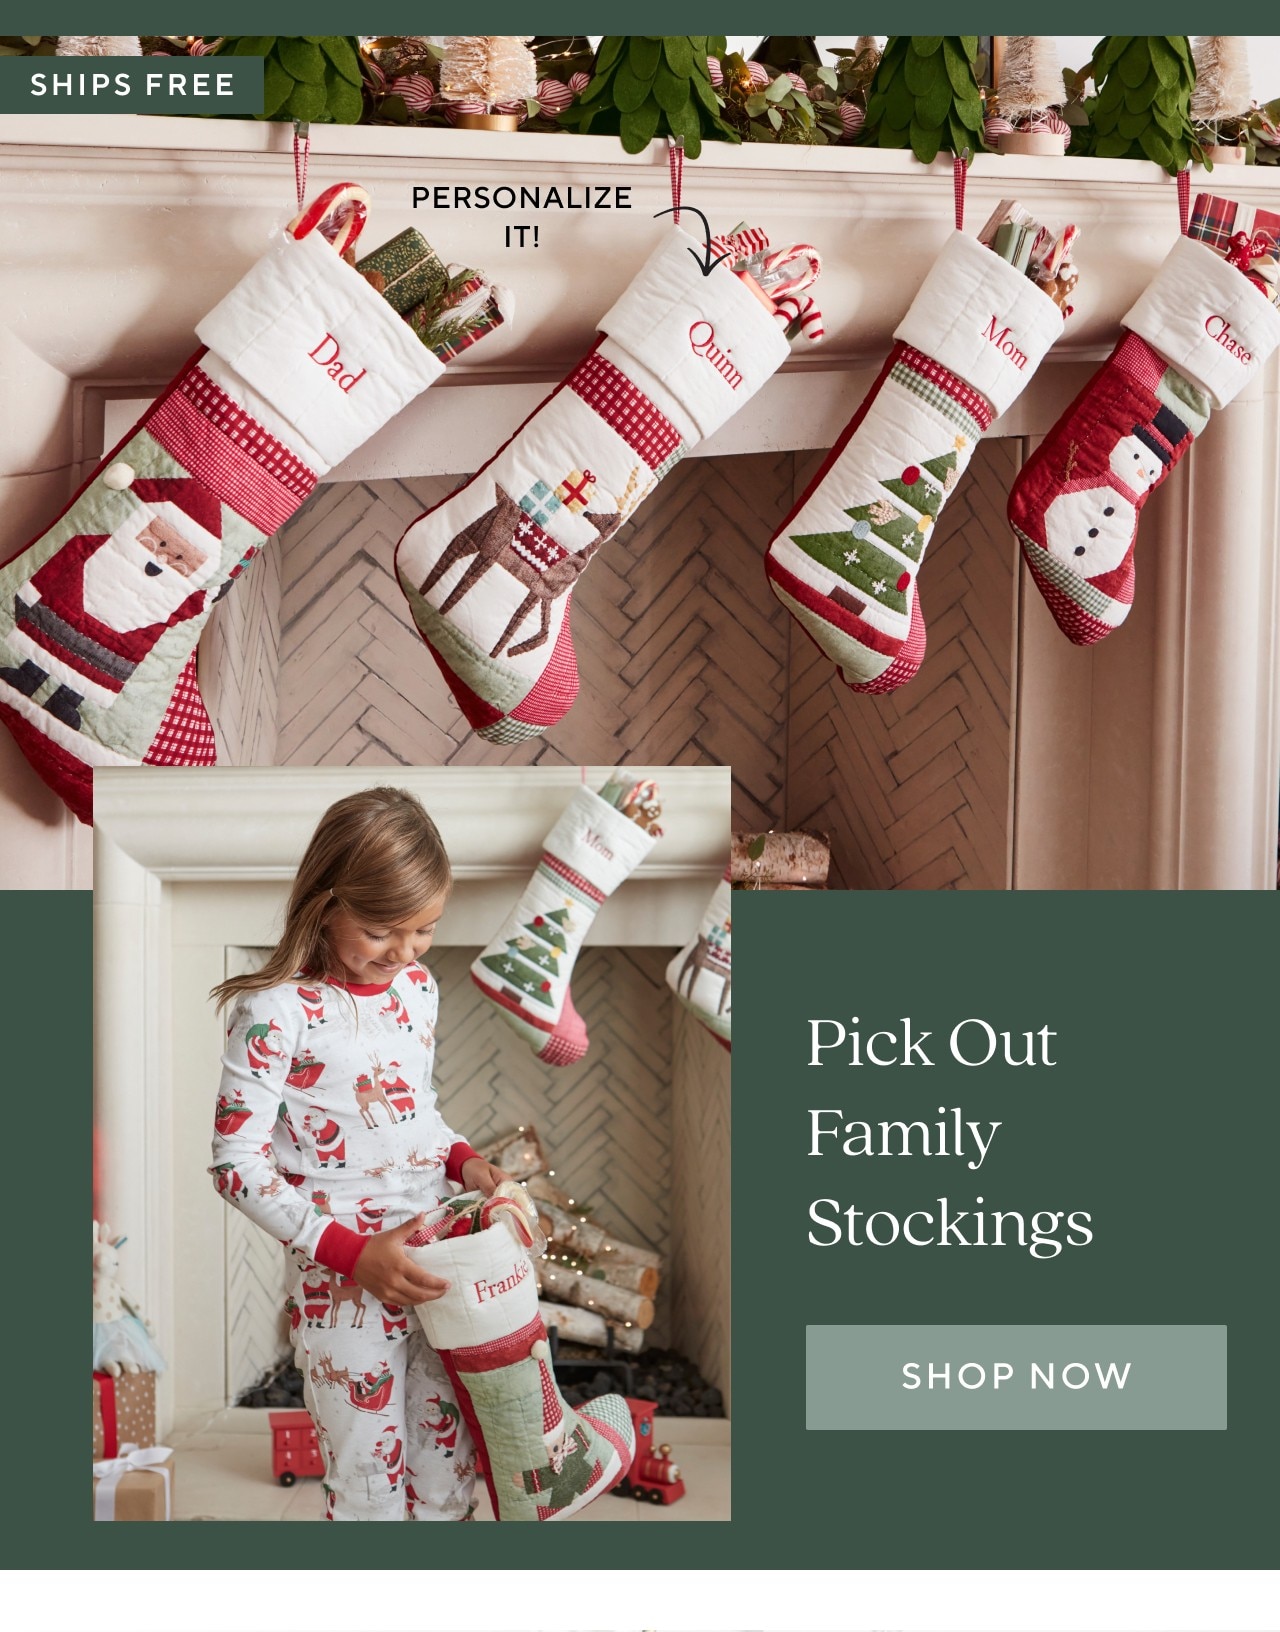 PICK OUT FAMILY STOCKINGS